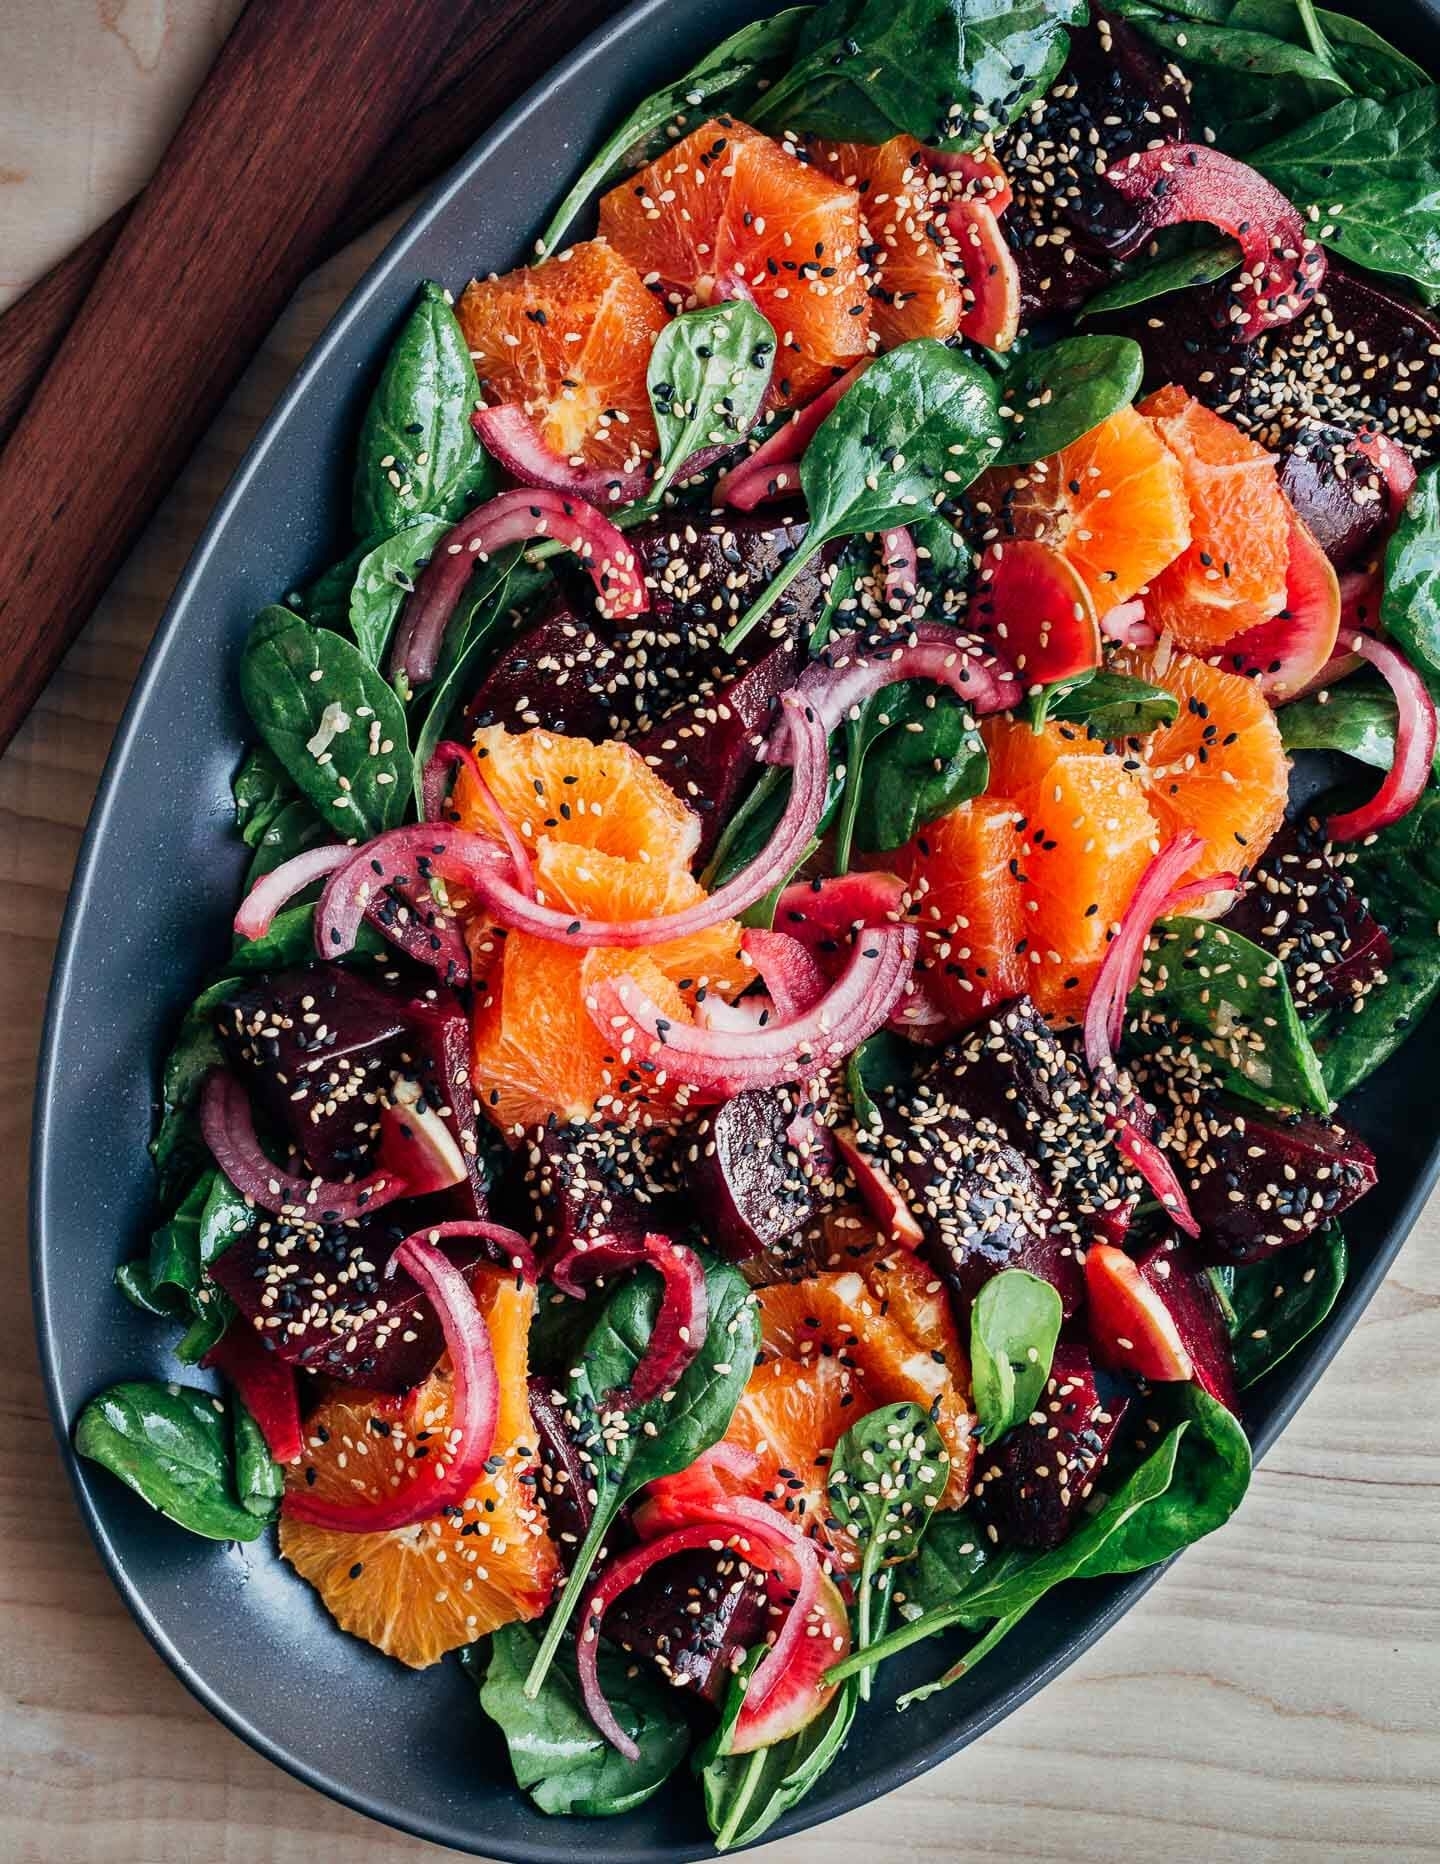 Salad with spinach, sliced oranges, beets, pickled onions, and sesame seeds served in a black oval dish